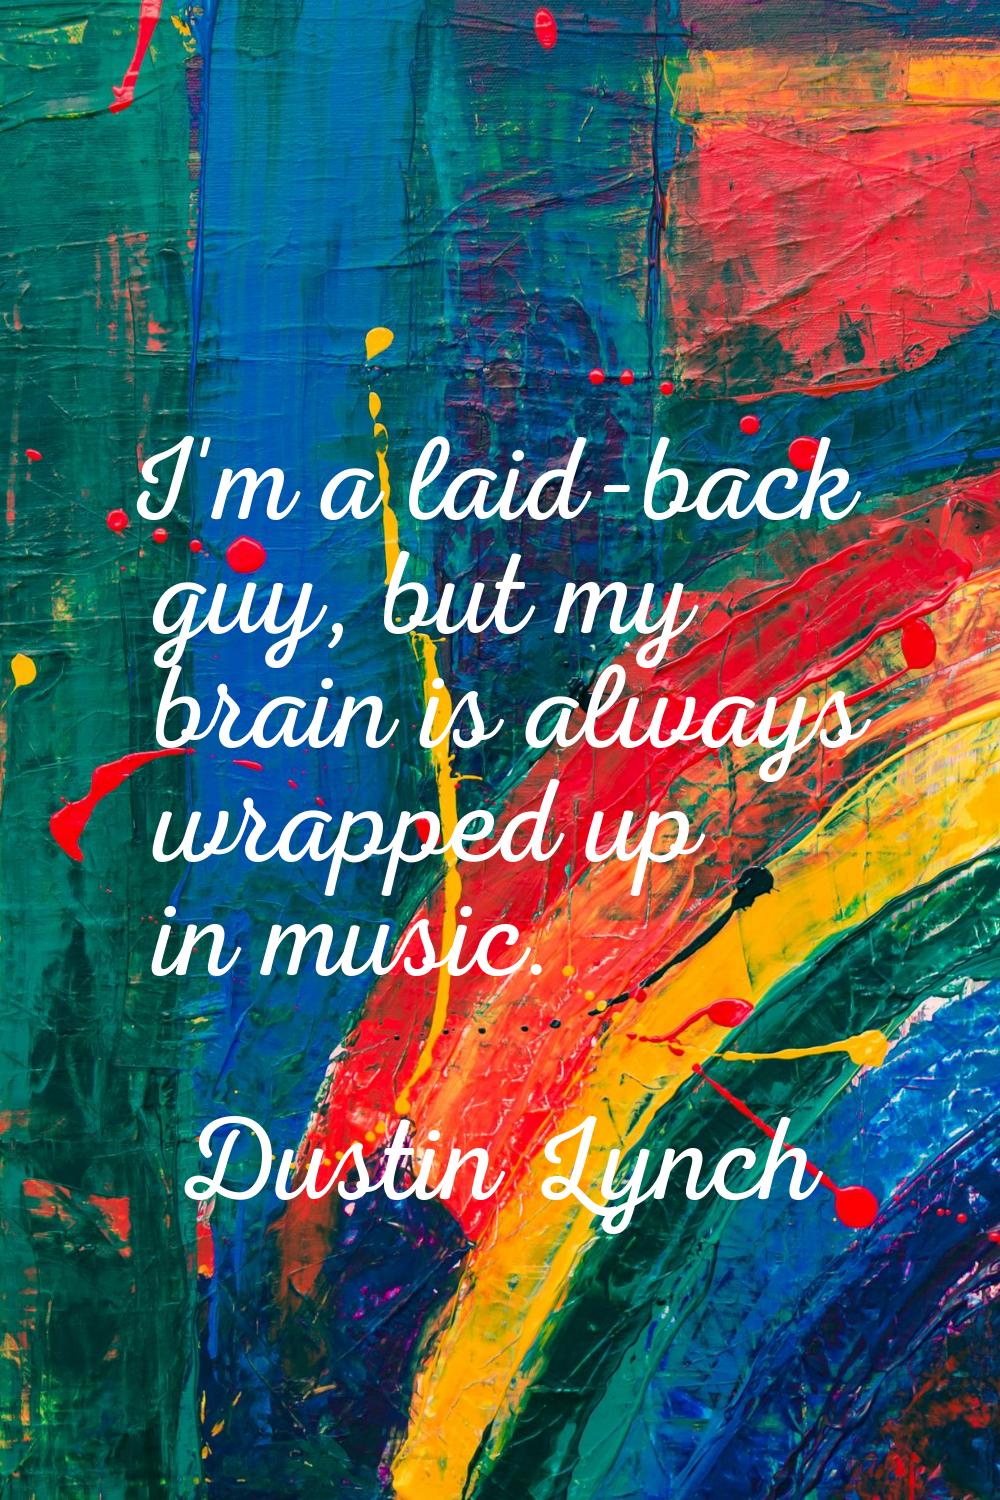 I'm a laid-back guy, but my brain is always wrapped up in music.